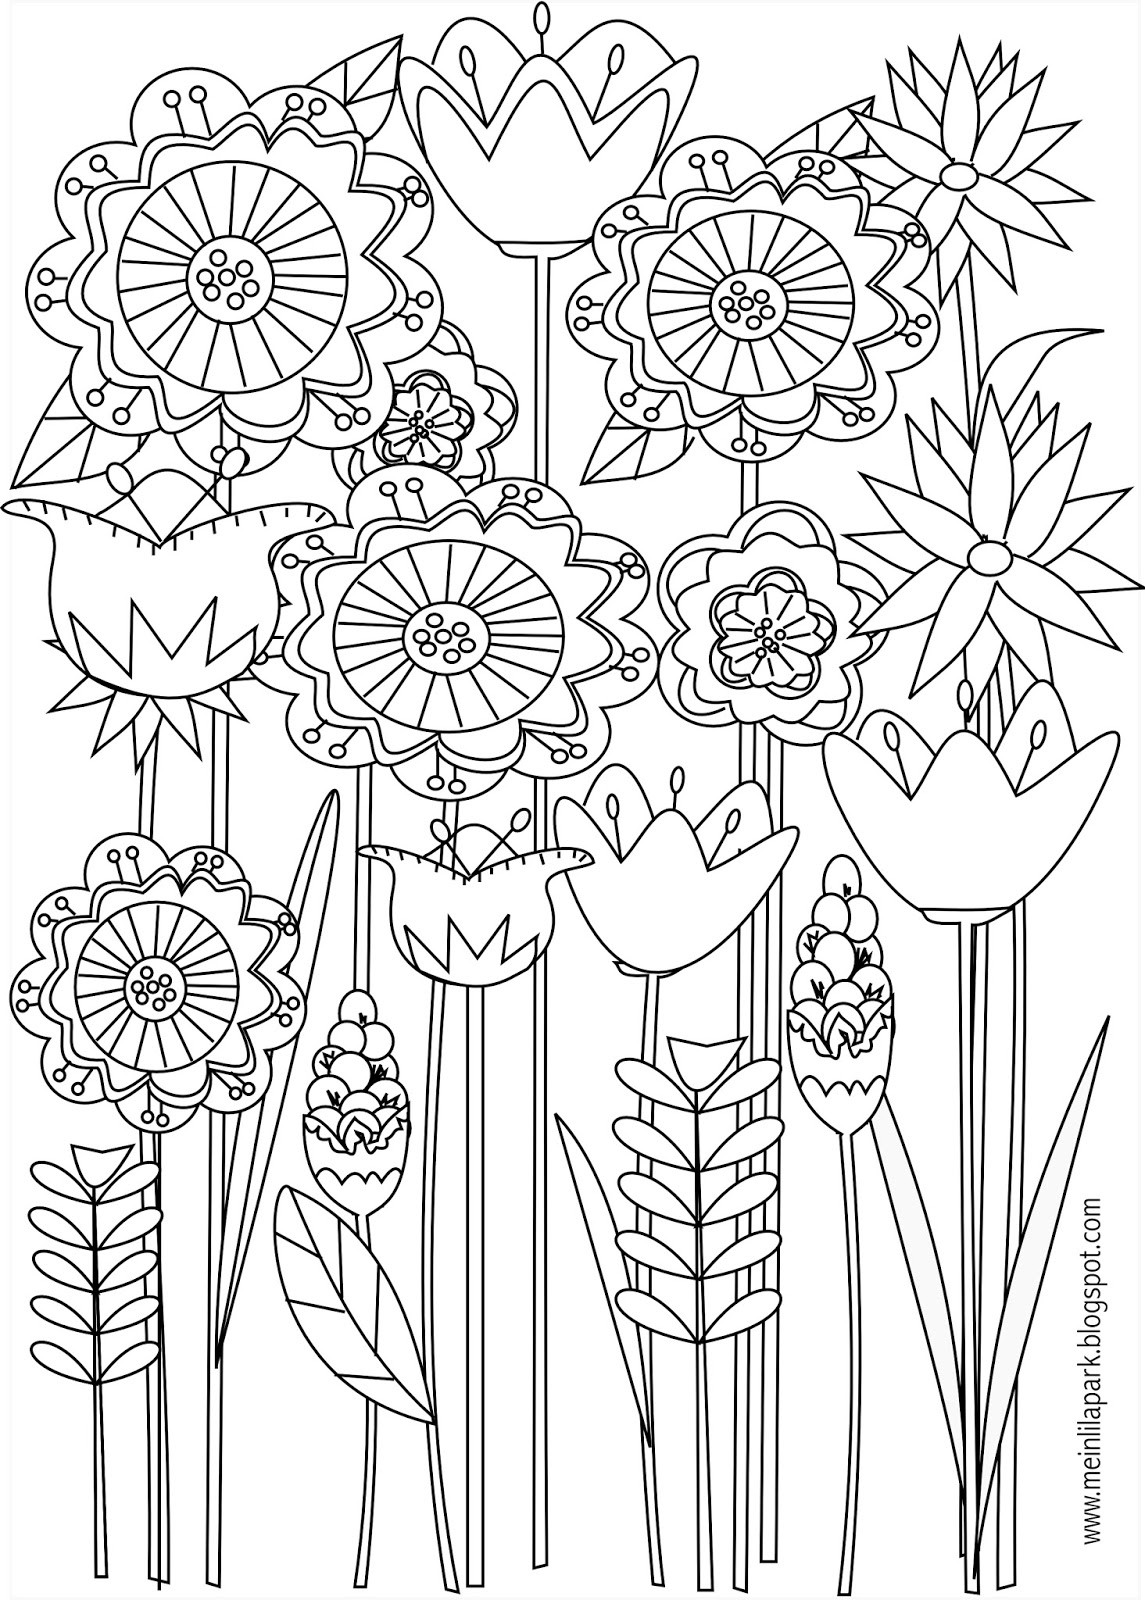 Spring Coloring Pages For Adults
 Free printable spring coloring pages Ausmalbilder